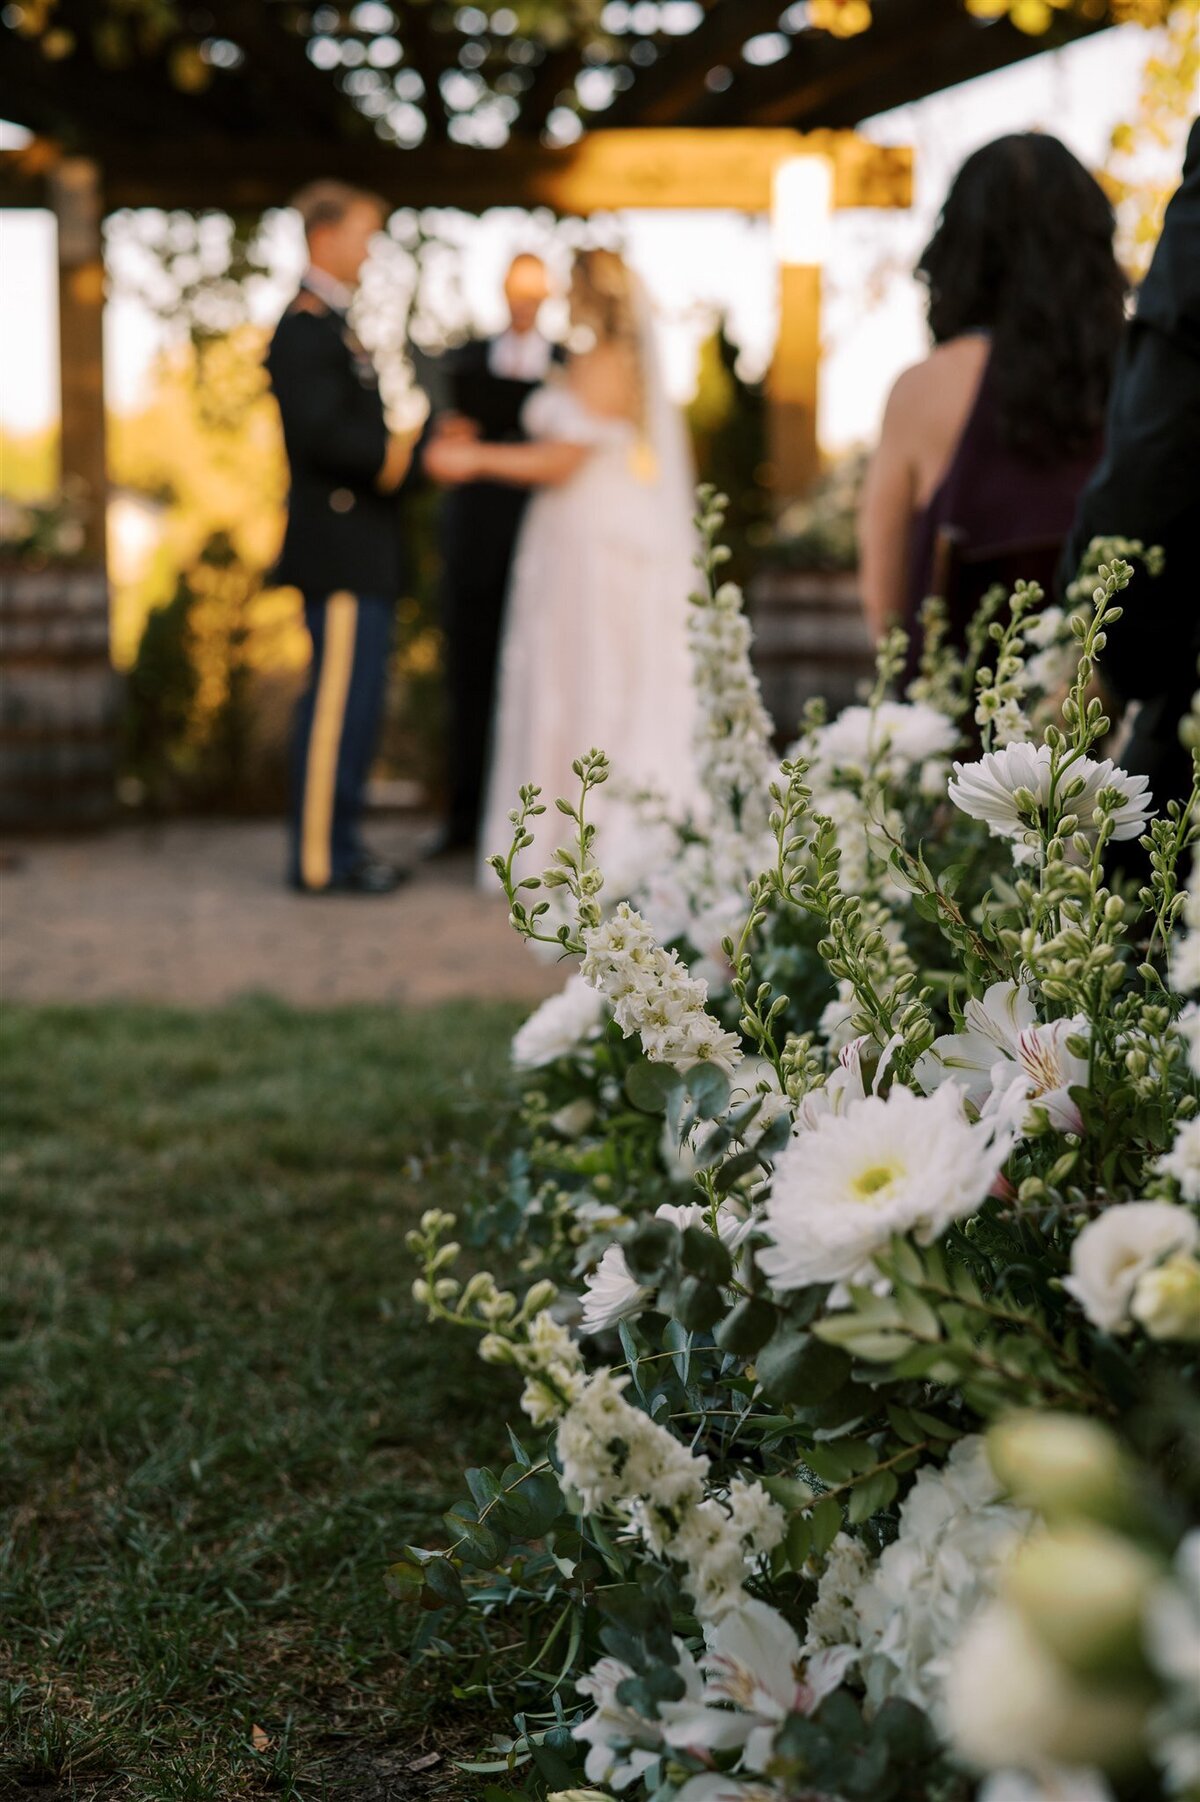 A wedding ceremony outdoors in Illinois with guests looking on, focusing on white flowers in the foreground with the bride and groom exchanging vows in the background.